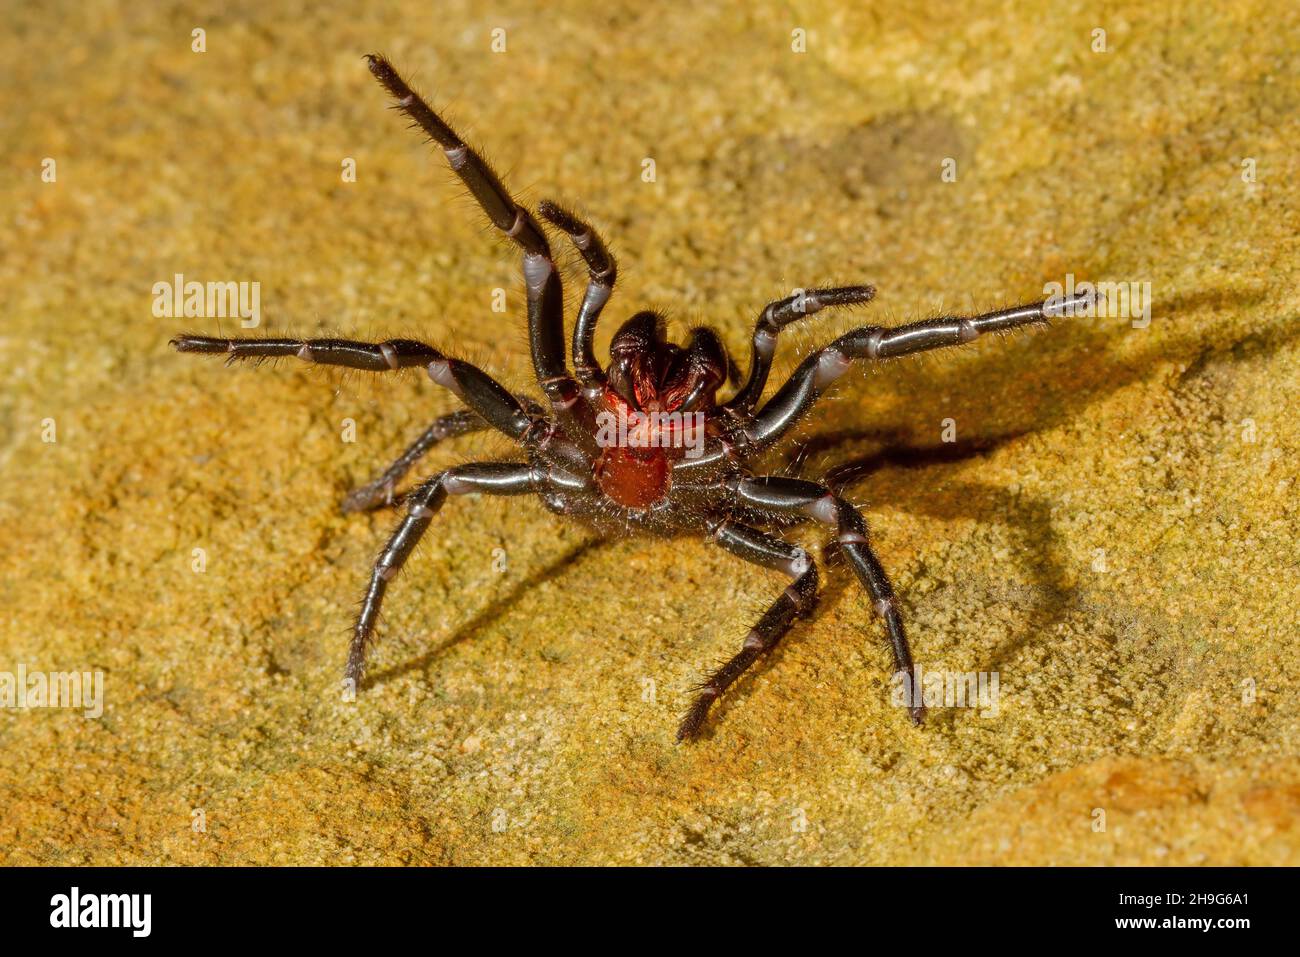 Sydney Funnel-Web Spider in defensive pose Stock Photo